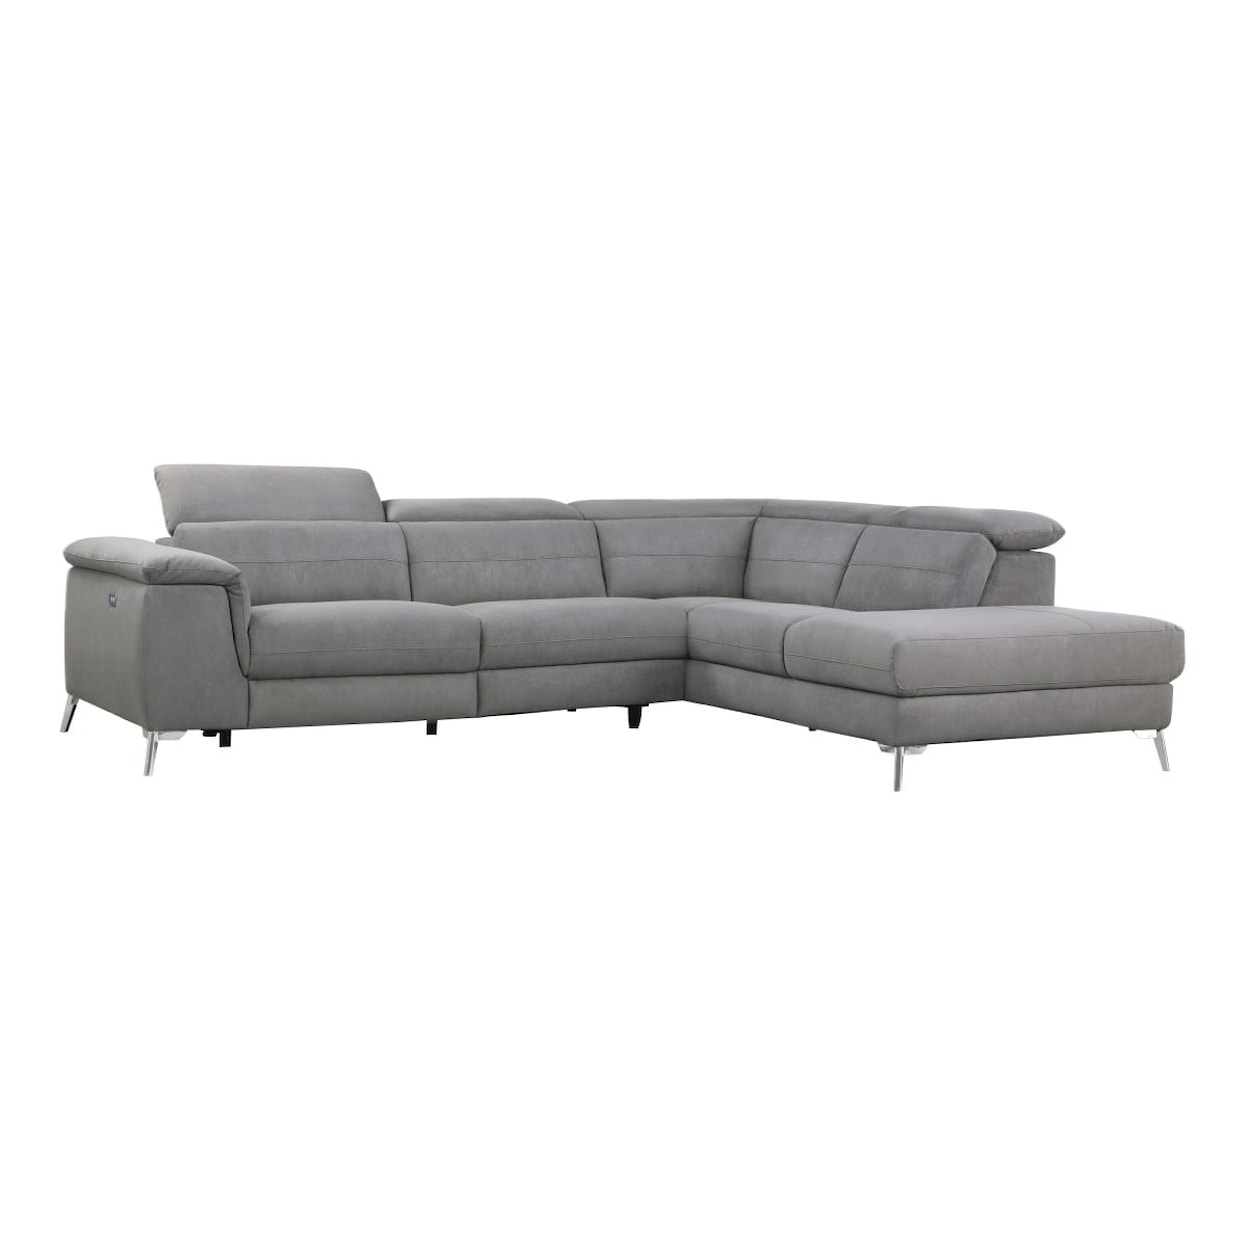 Homelegance Cinque 2-Piece Power Sectional with Right Chaise